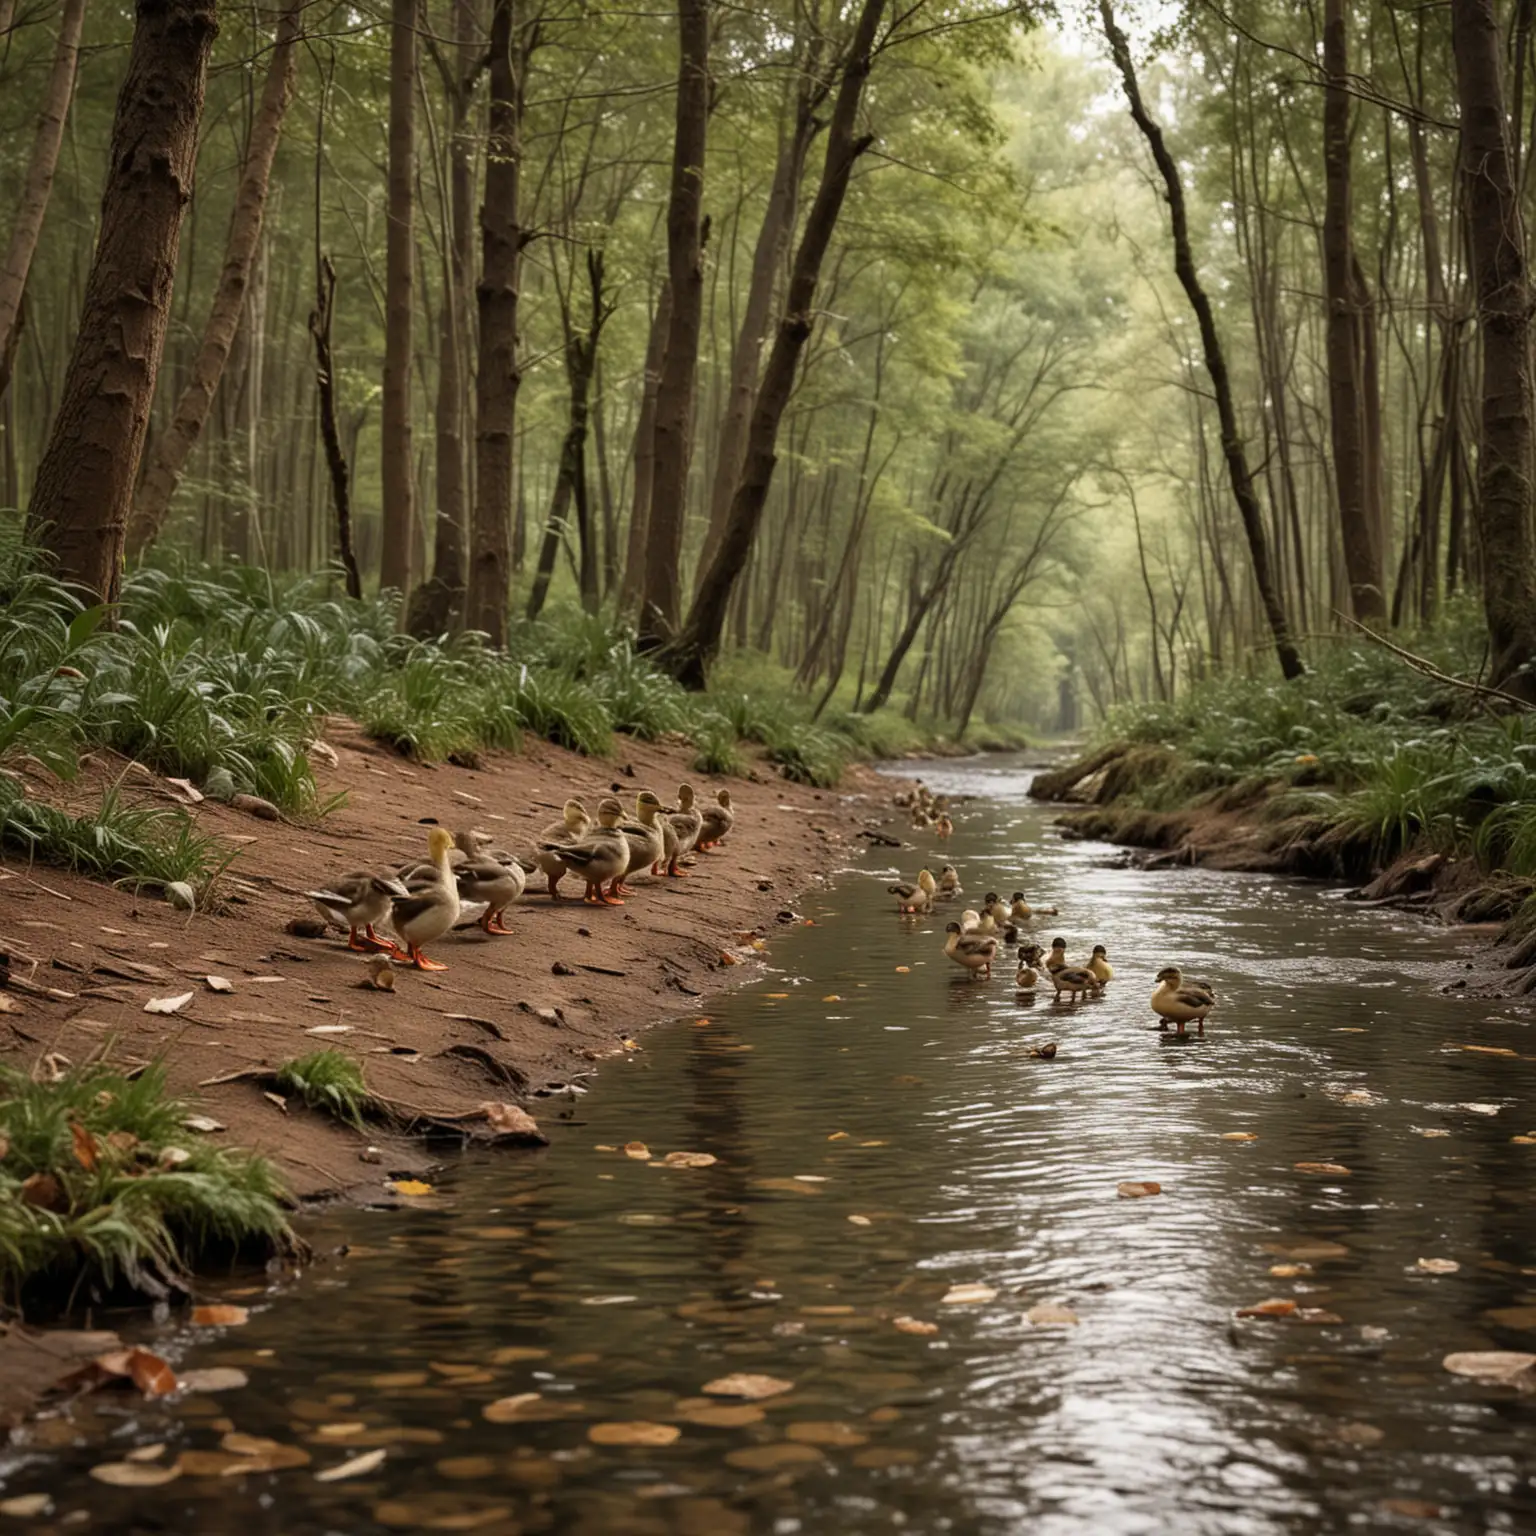 six little ducks walking through a forest down to a river